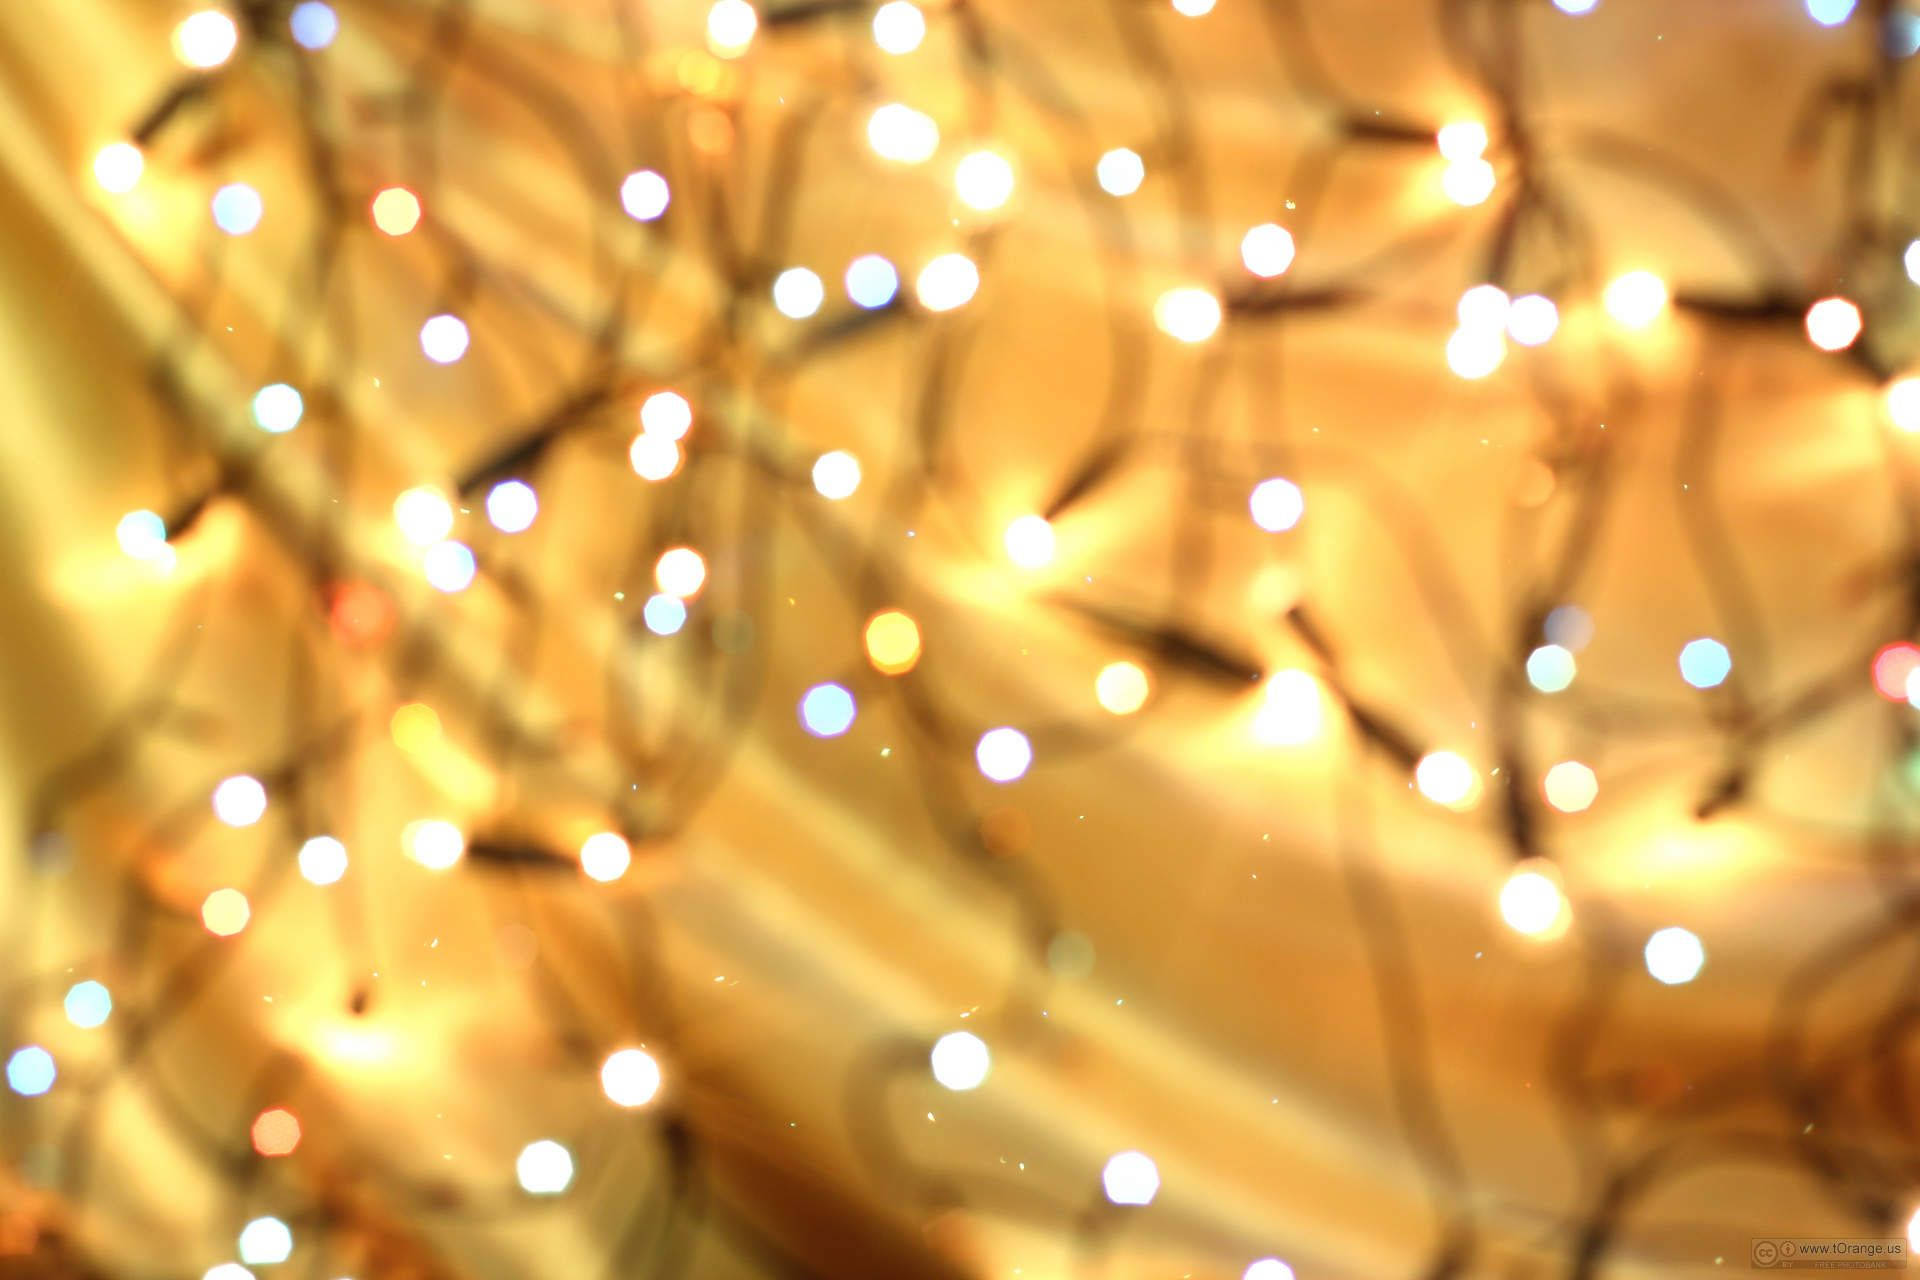 “Surround yourself with beautiful lights and spread the festive cheer.” Wallpaper